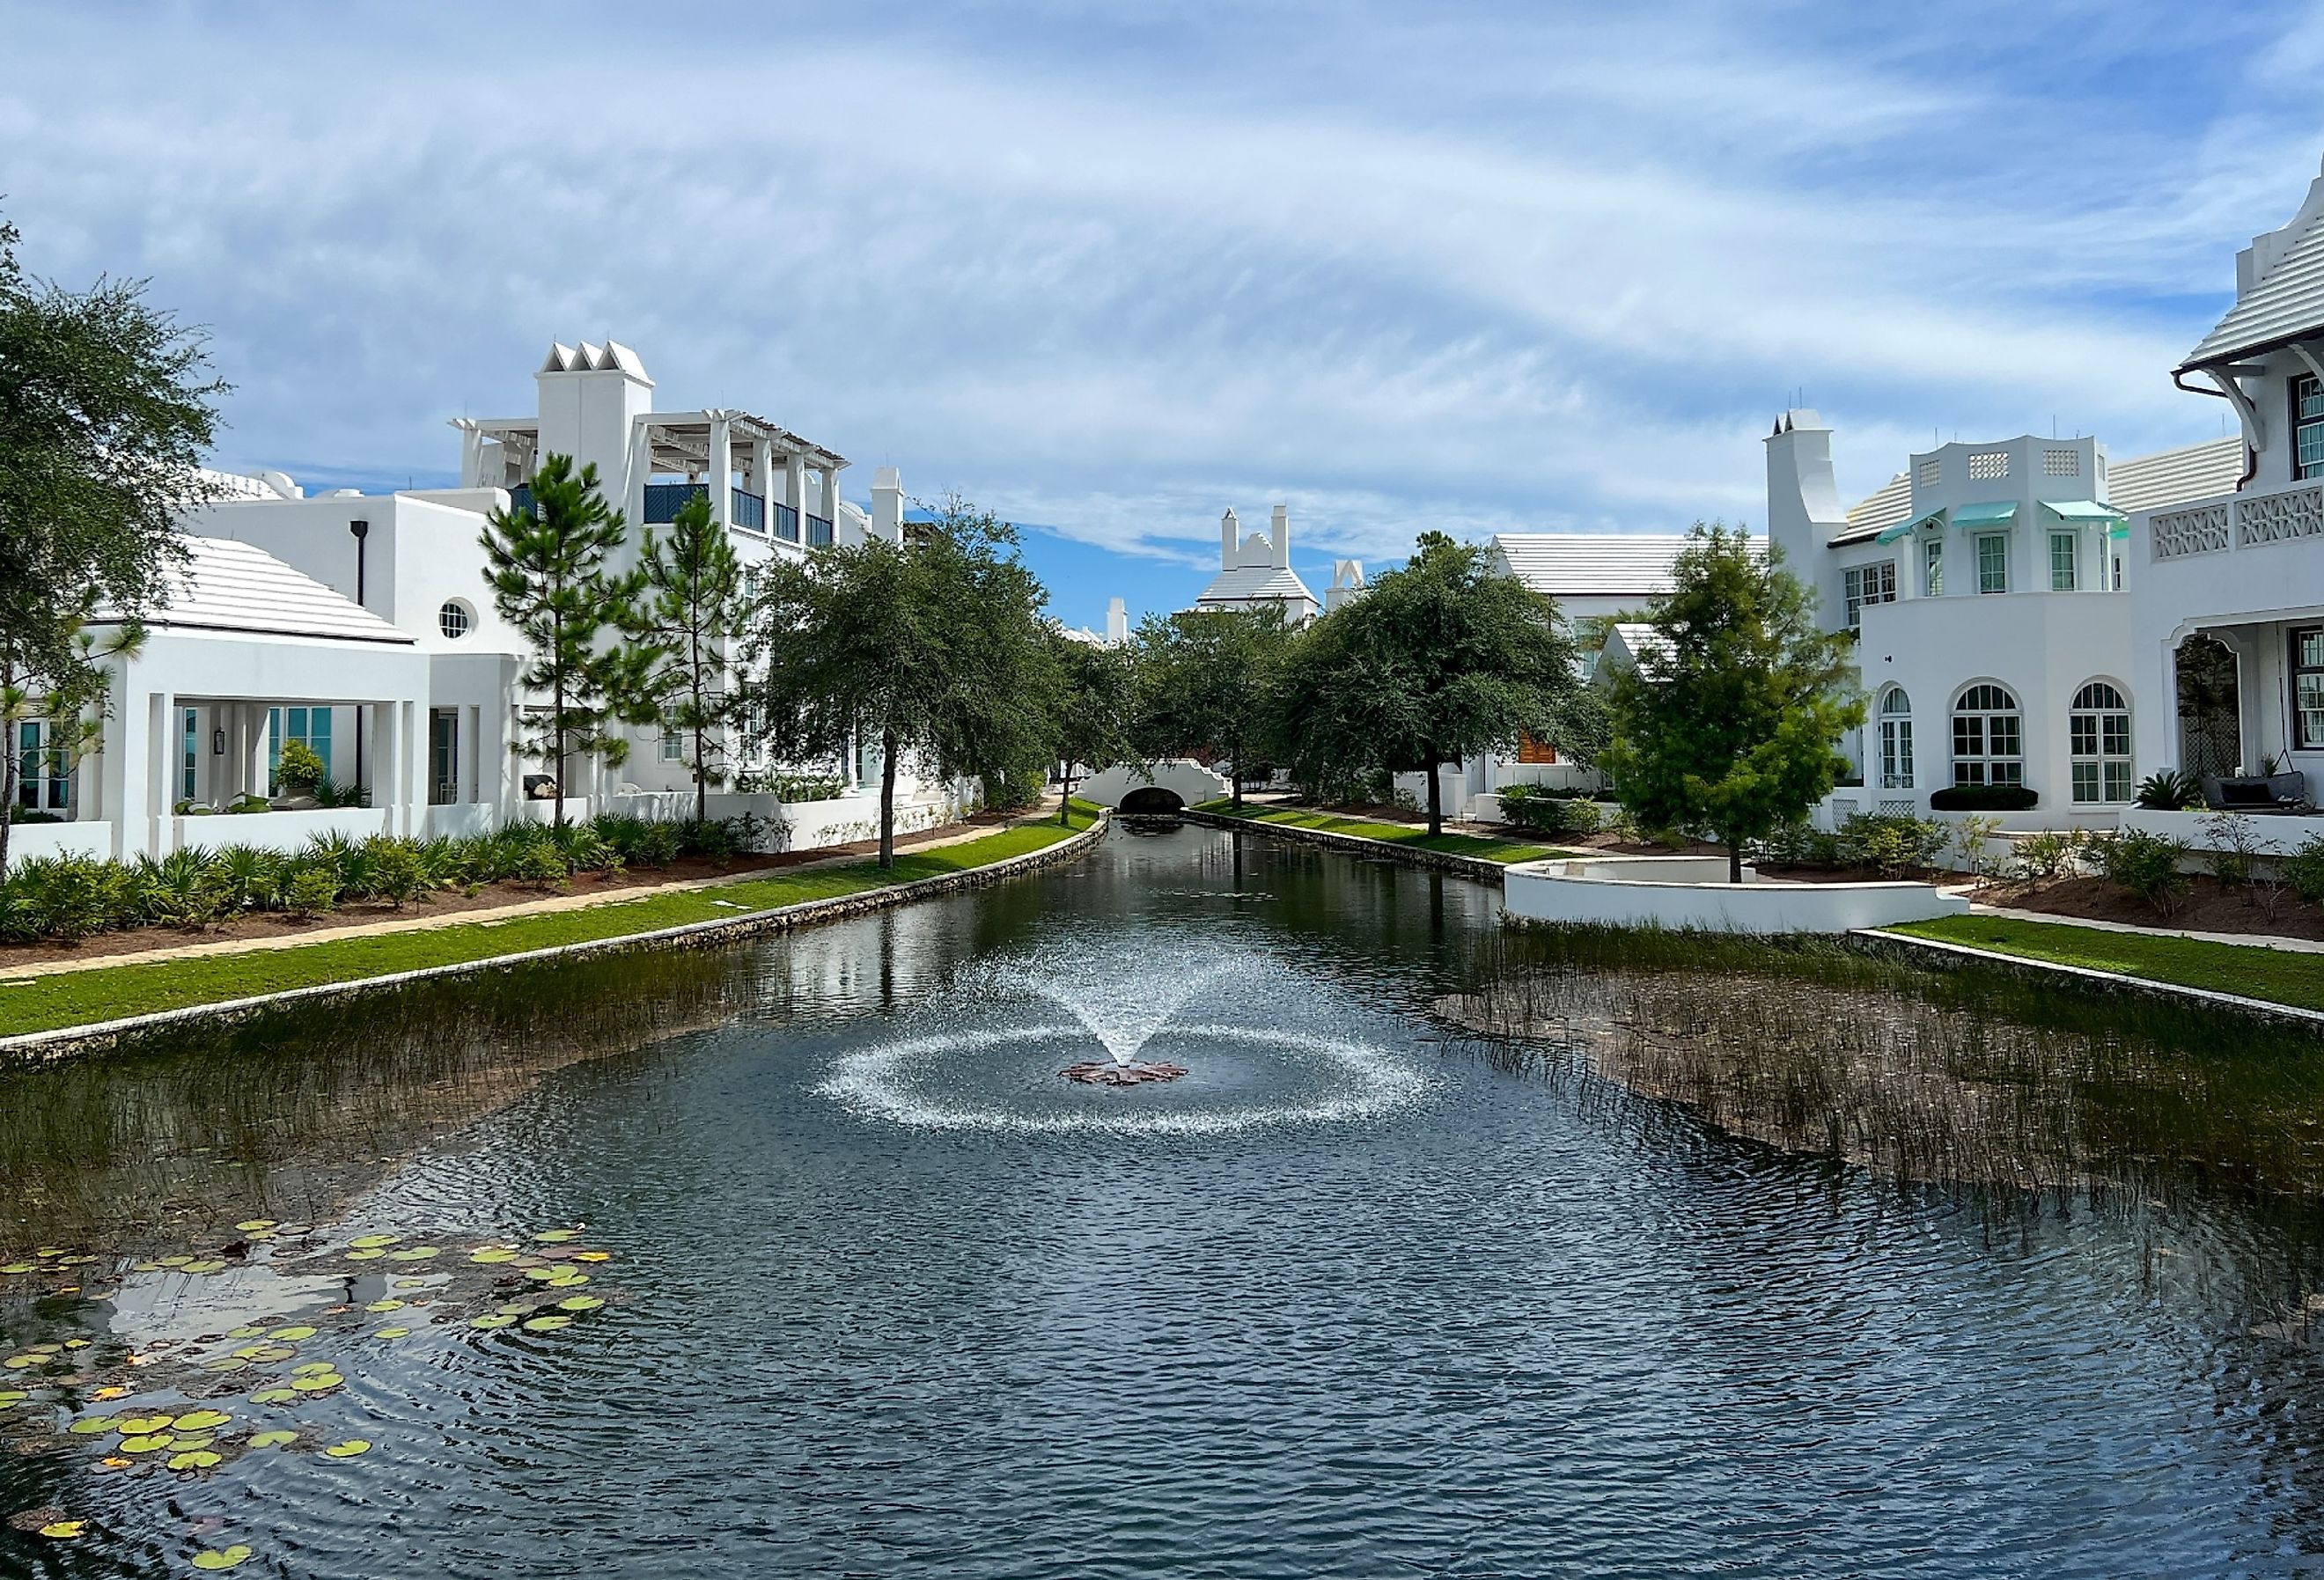 A walking path with water features and homes in Alys Beach, Florida. Image credit Joni Hanebutt via Shutterstock